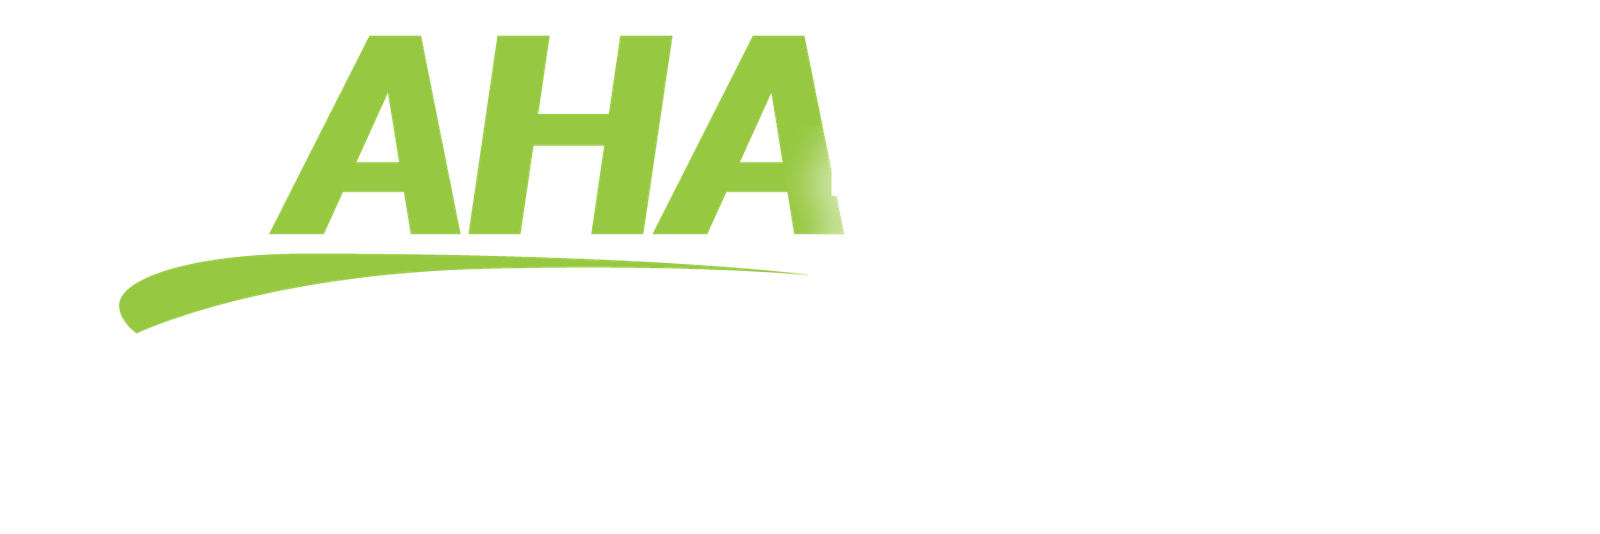 AHAthat for Sharing, Authoring & Promoting Content